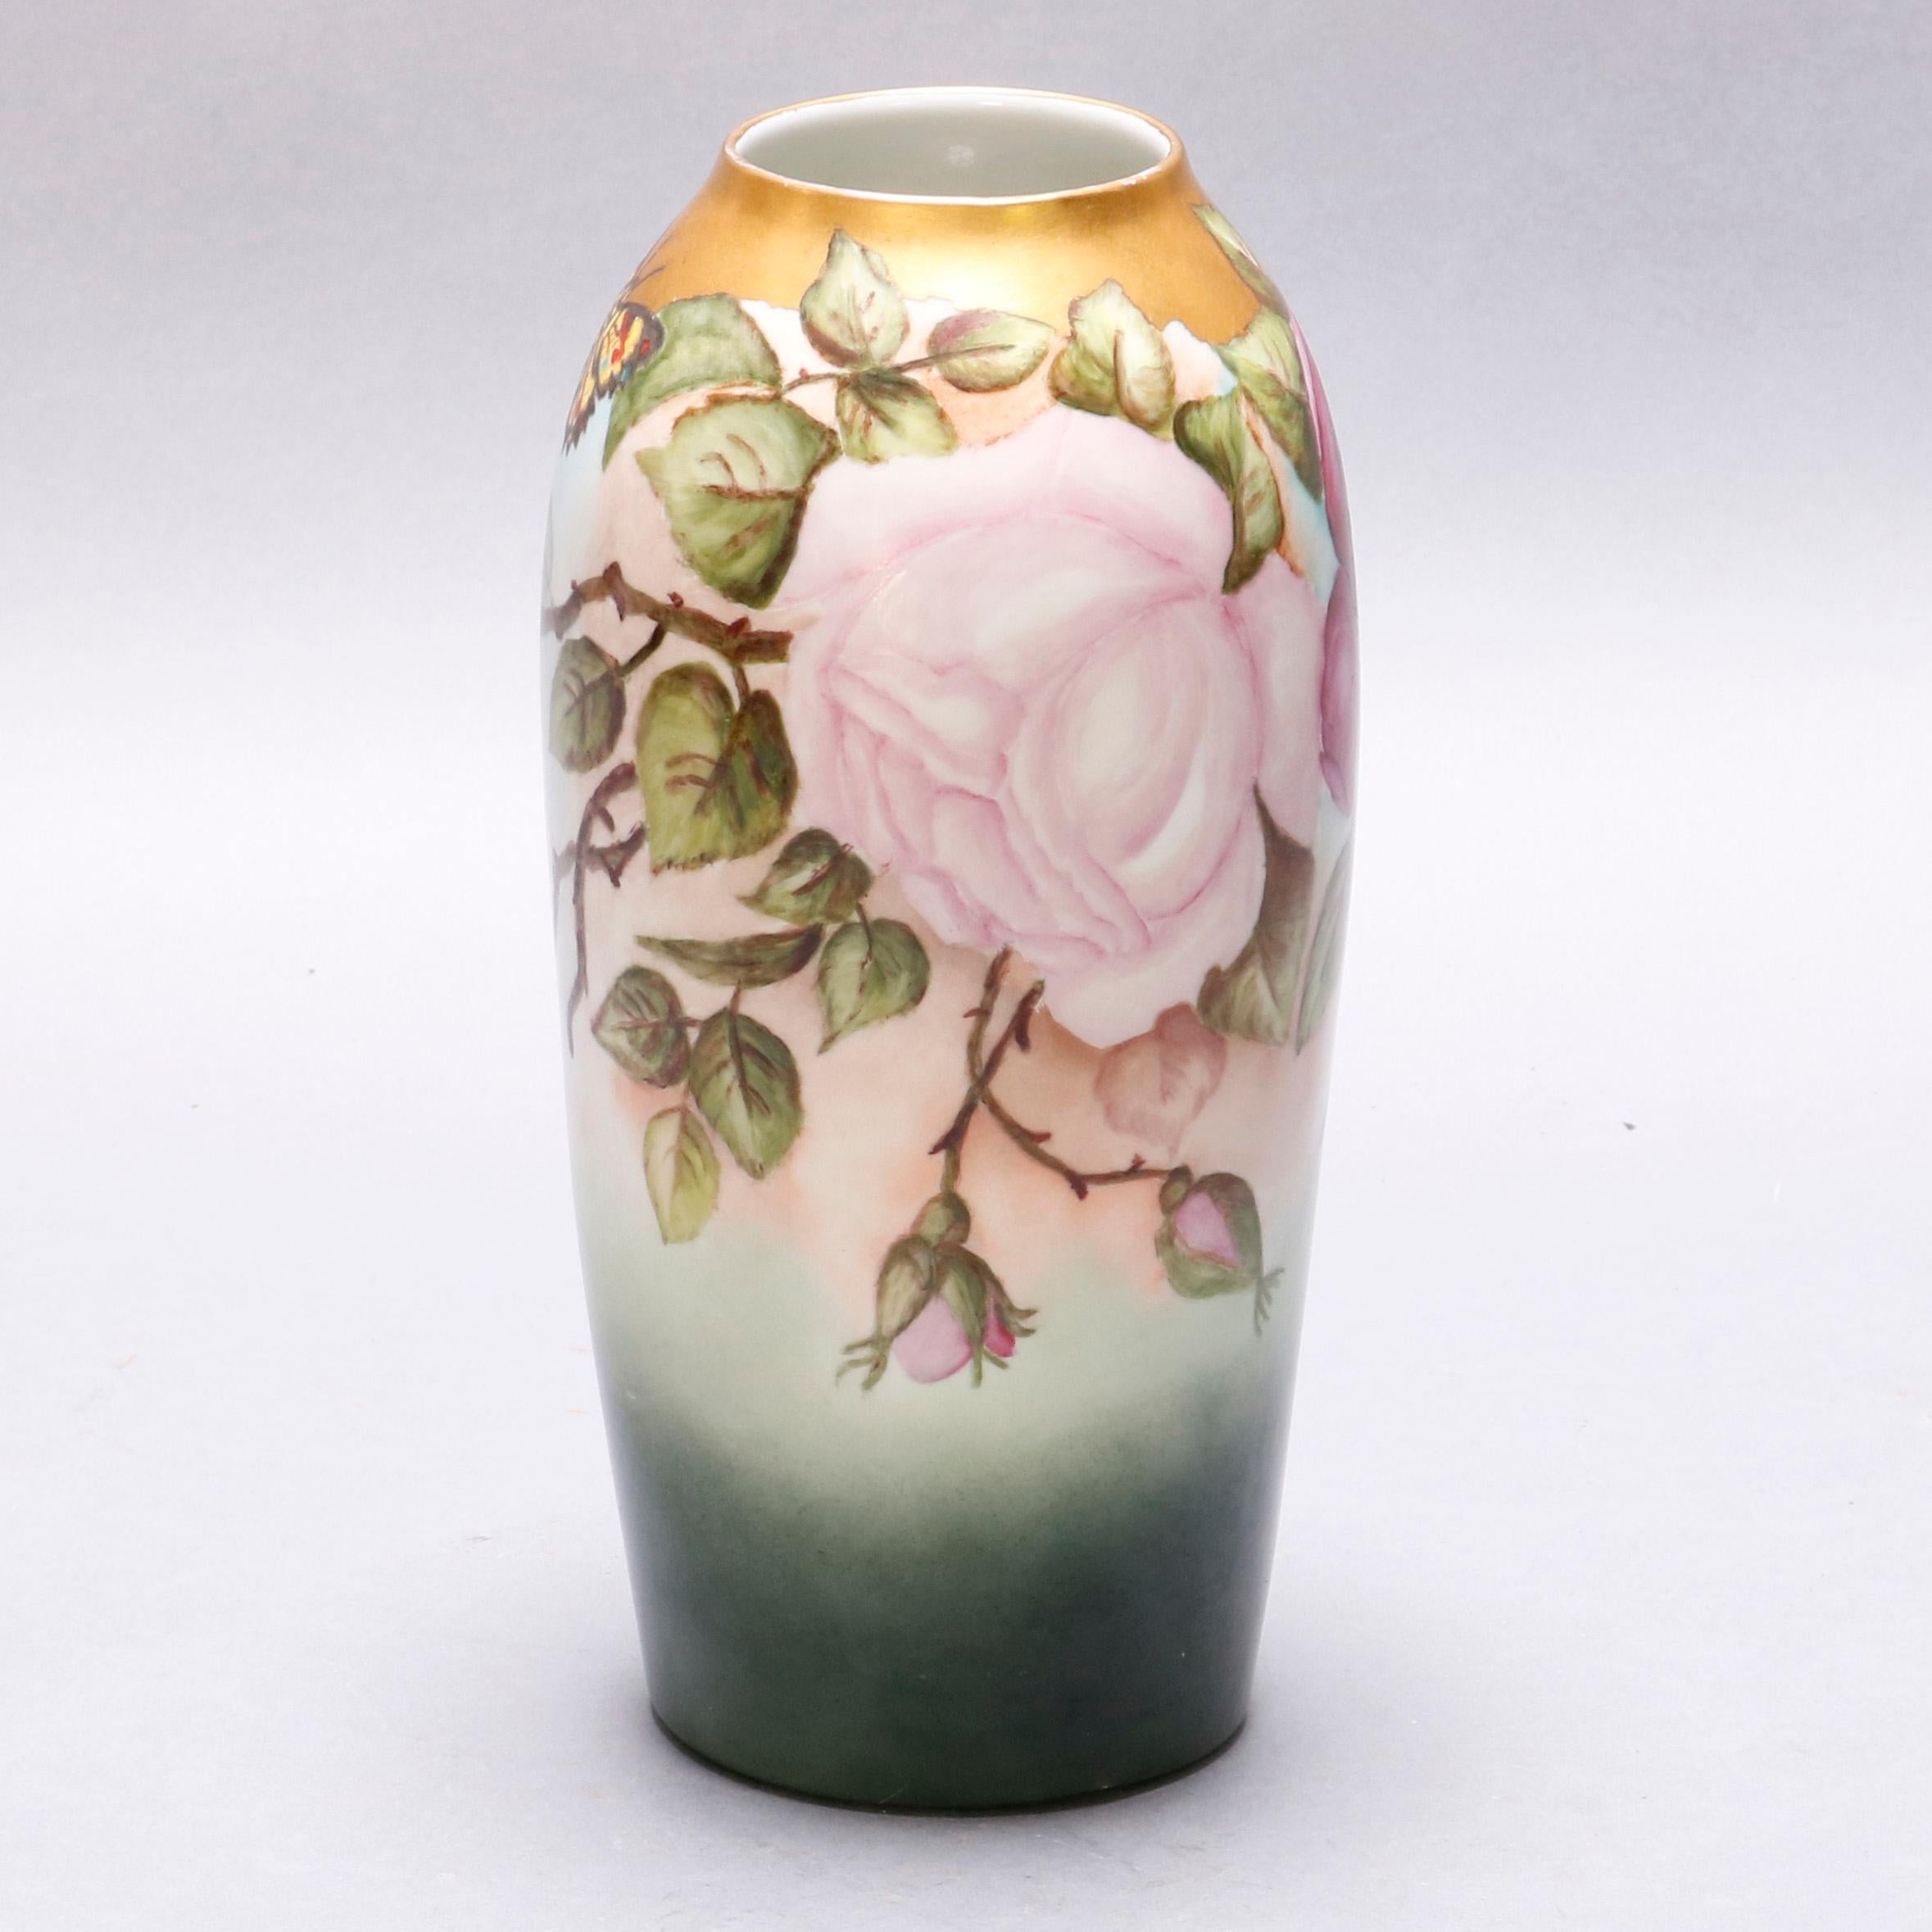 An antique German porcelain vase by Rosenthal China, Bavaria offers all-over rose garden decoration with butterfly, base with green R&C crown maker mark, reminiscent of French Limoges, circa 1920

***DELIVERY NOTICE – Due to COVID-19 we are